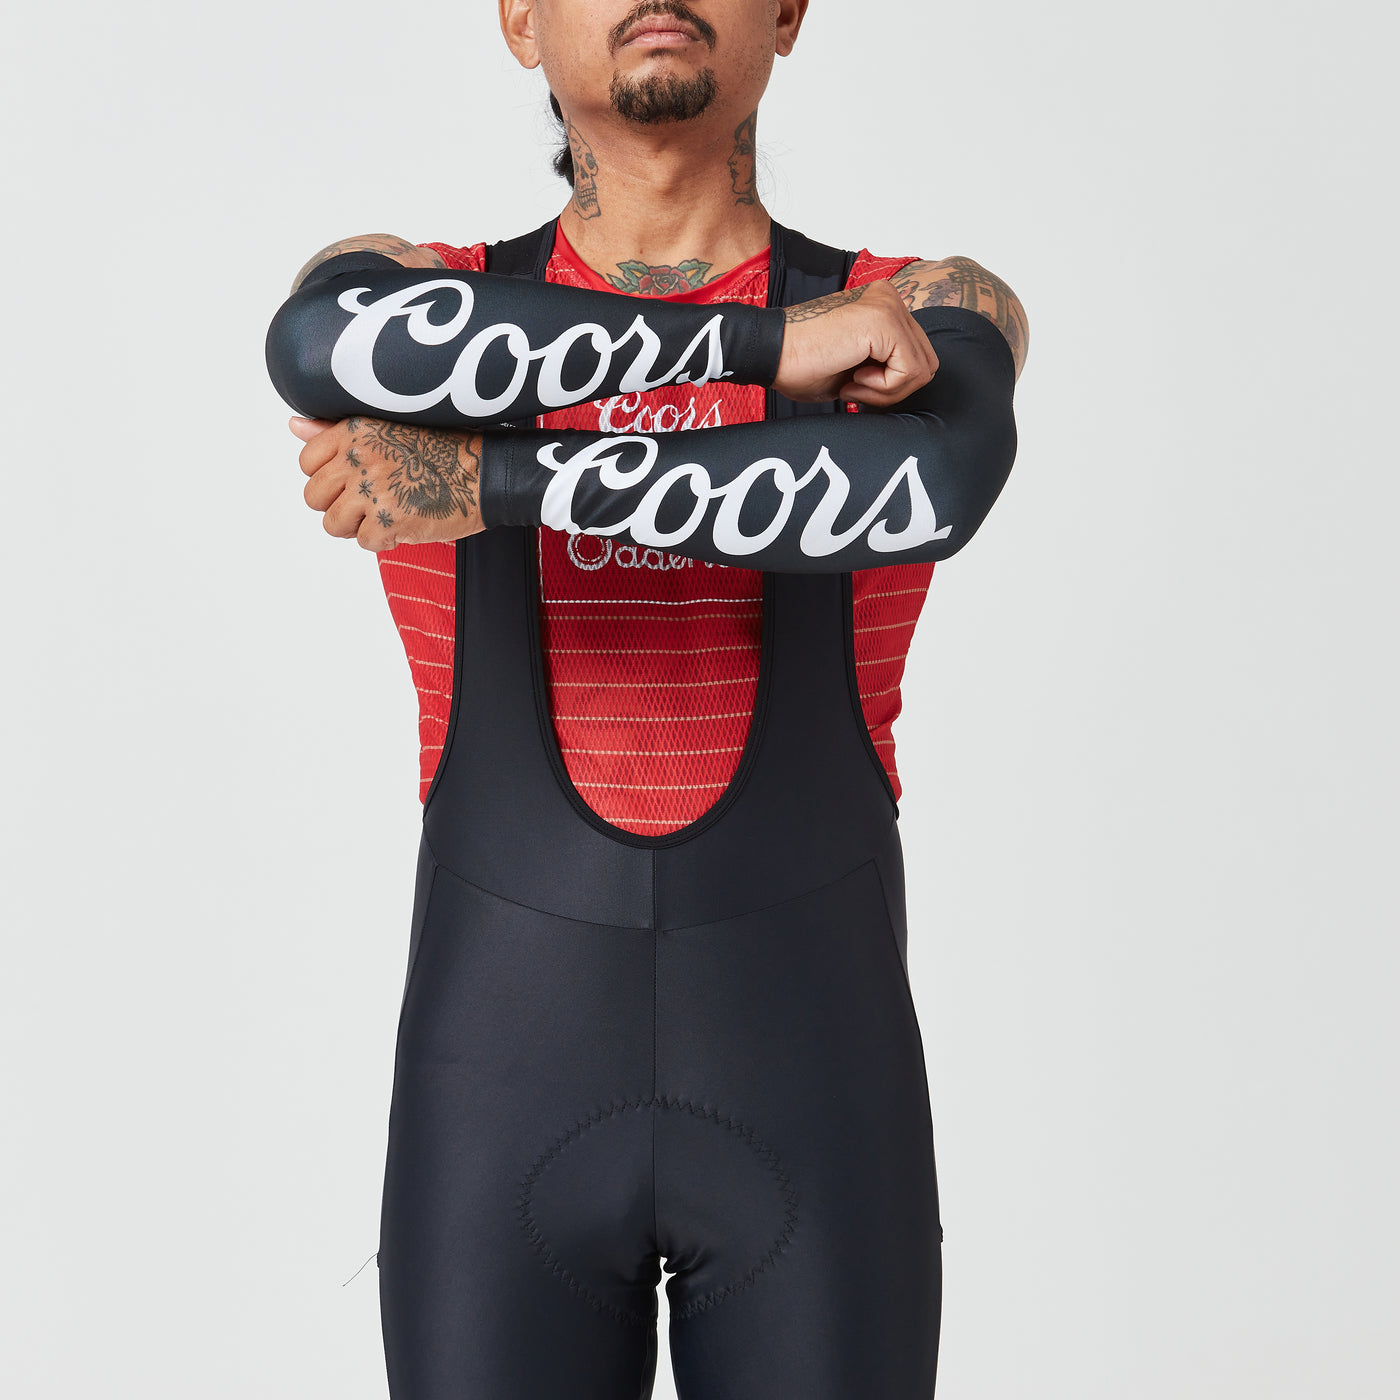 Coors Banquet Arm Warmers [Black]